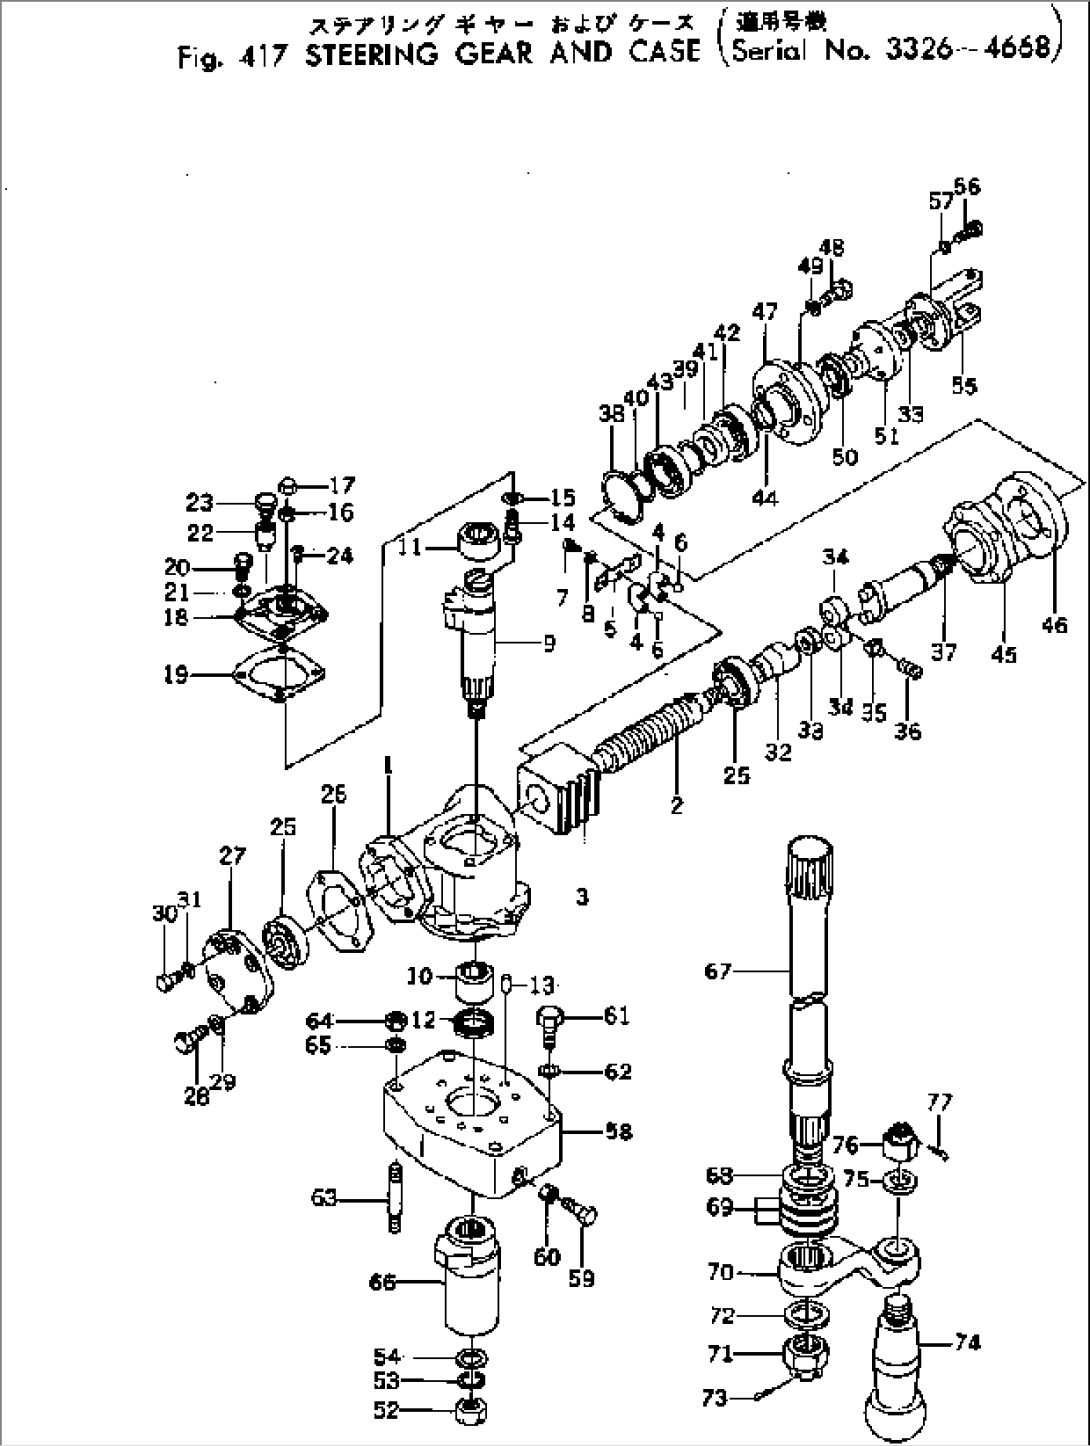 STEERING GEAR AND CASE(#3326-4668)